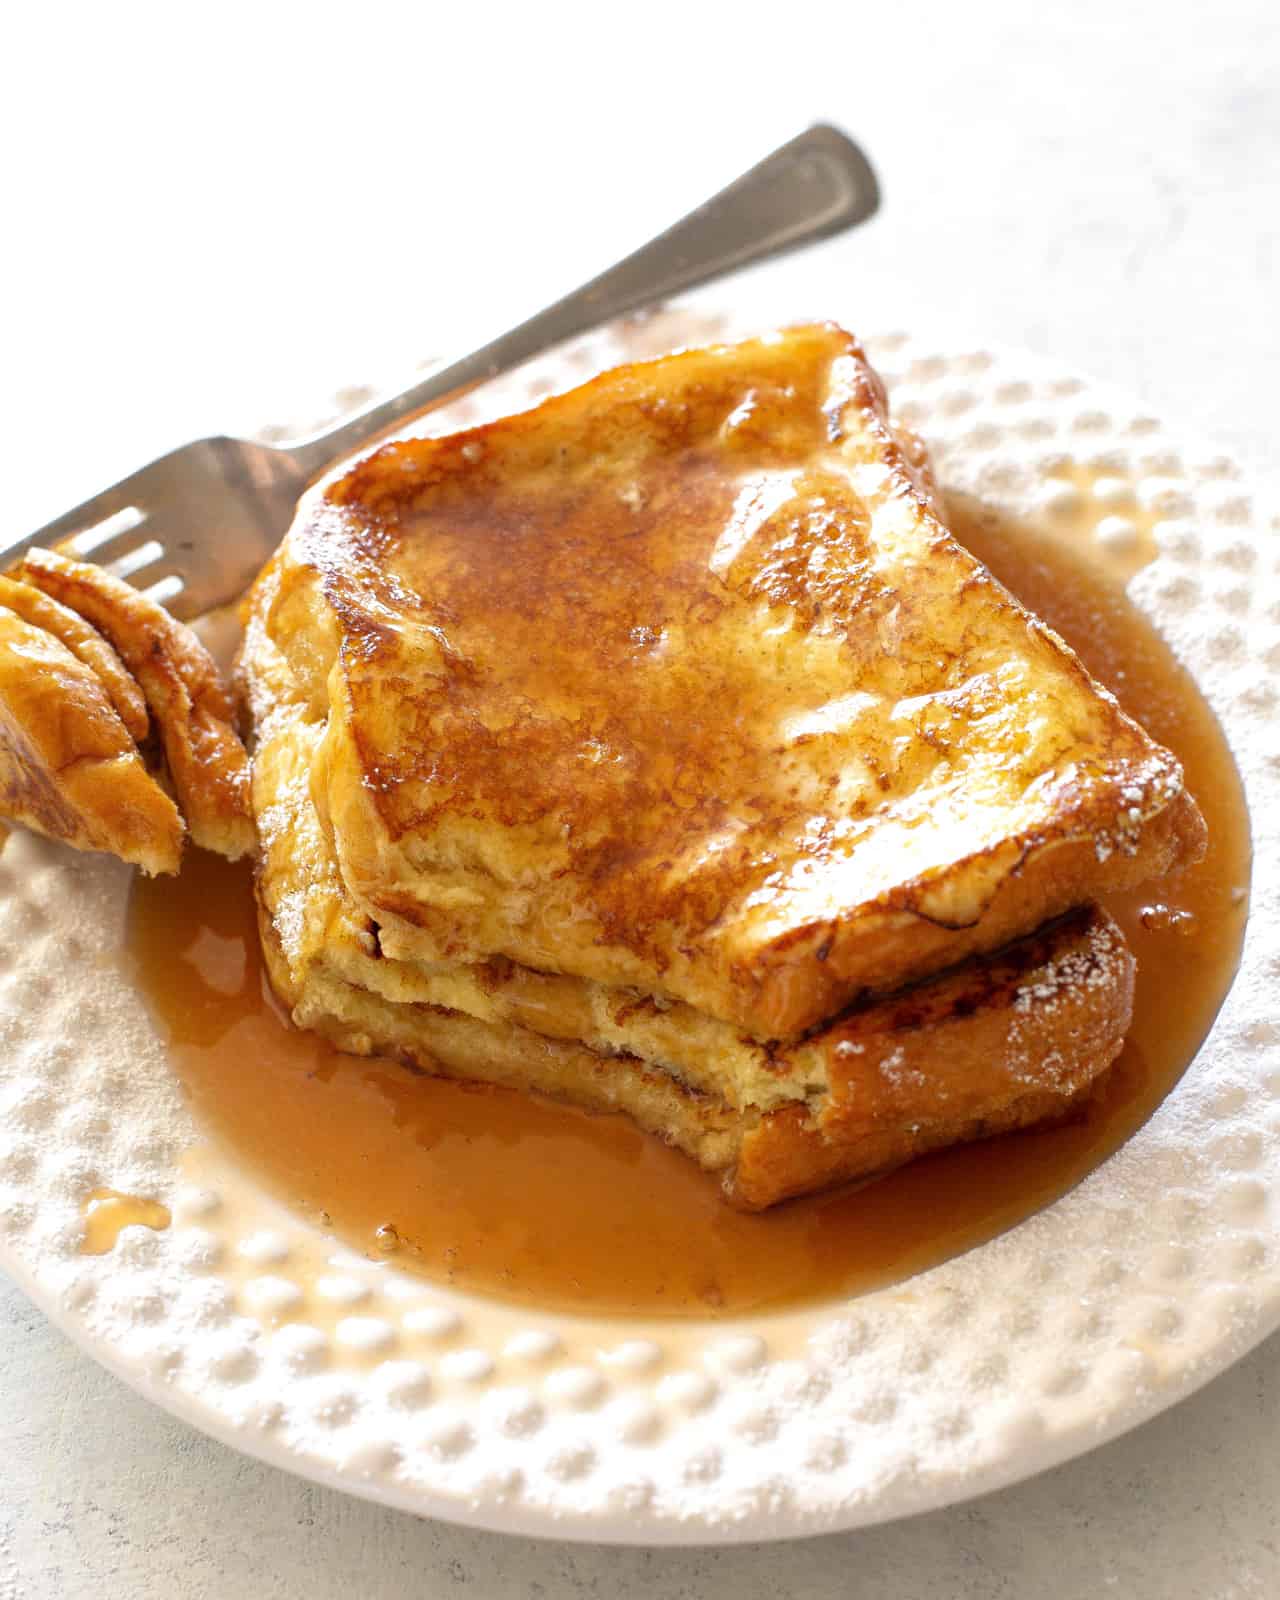 For the Best French Toast, Should You Toast the Bread First?